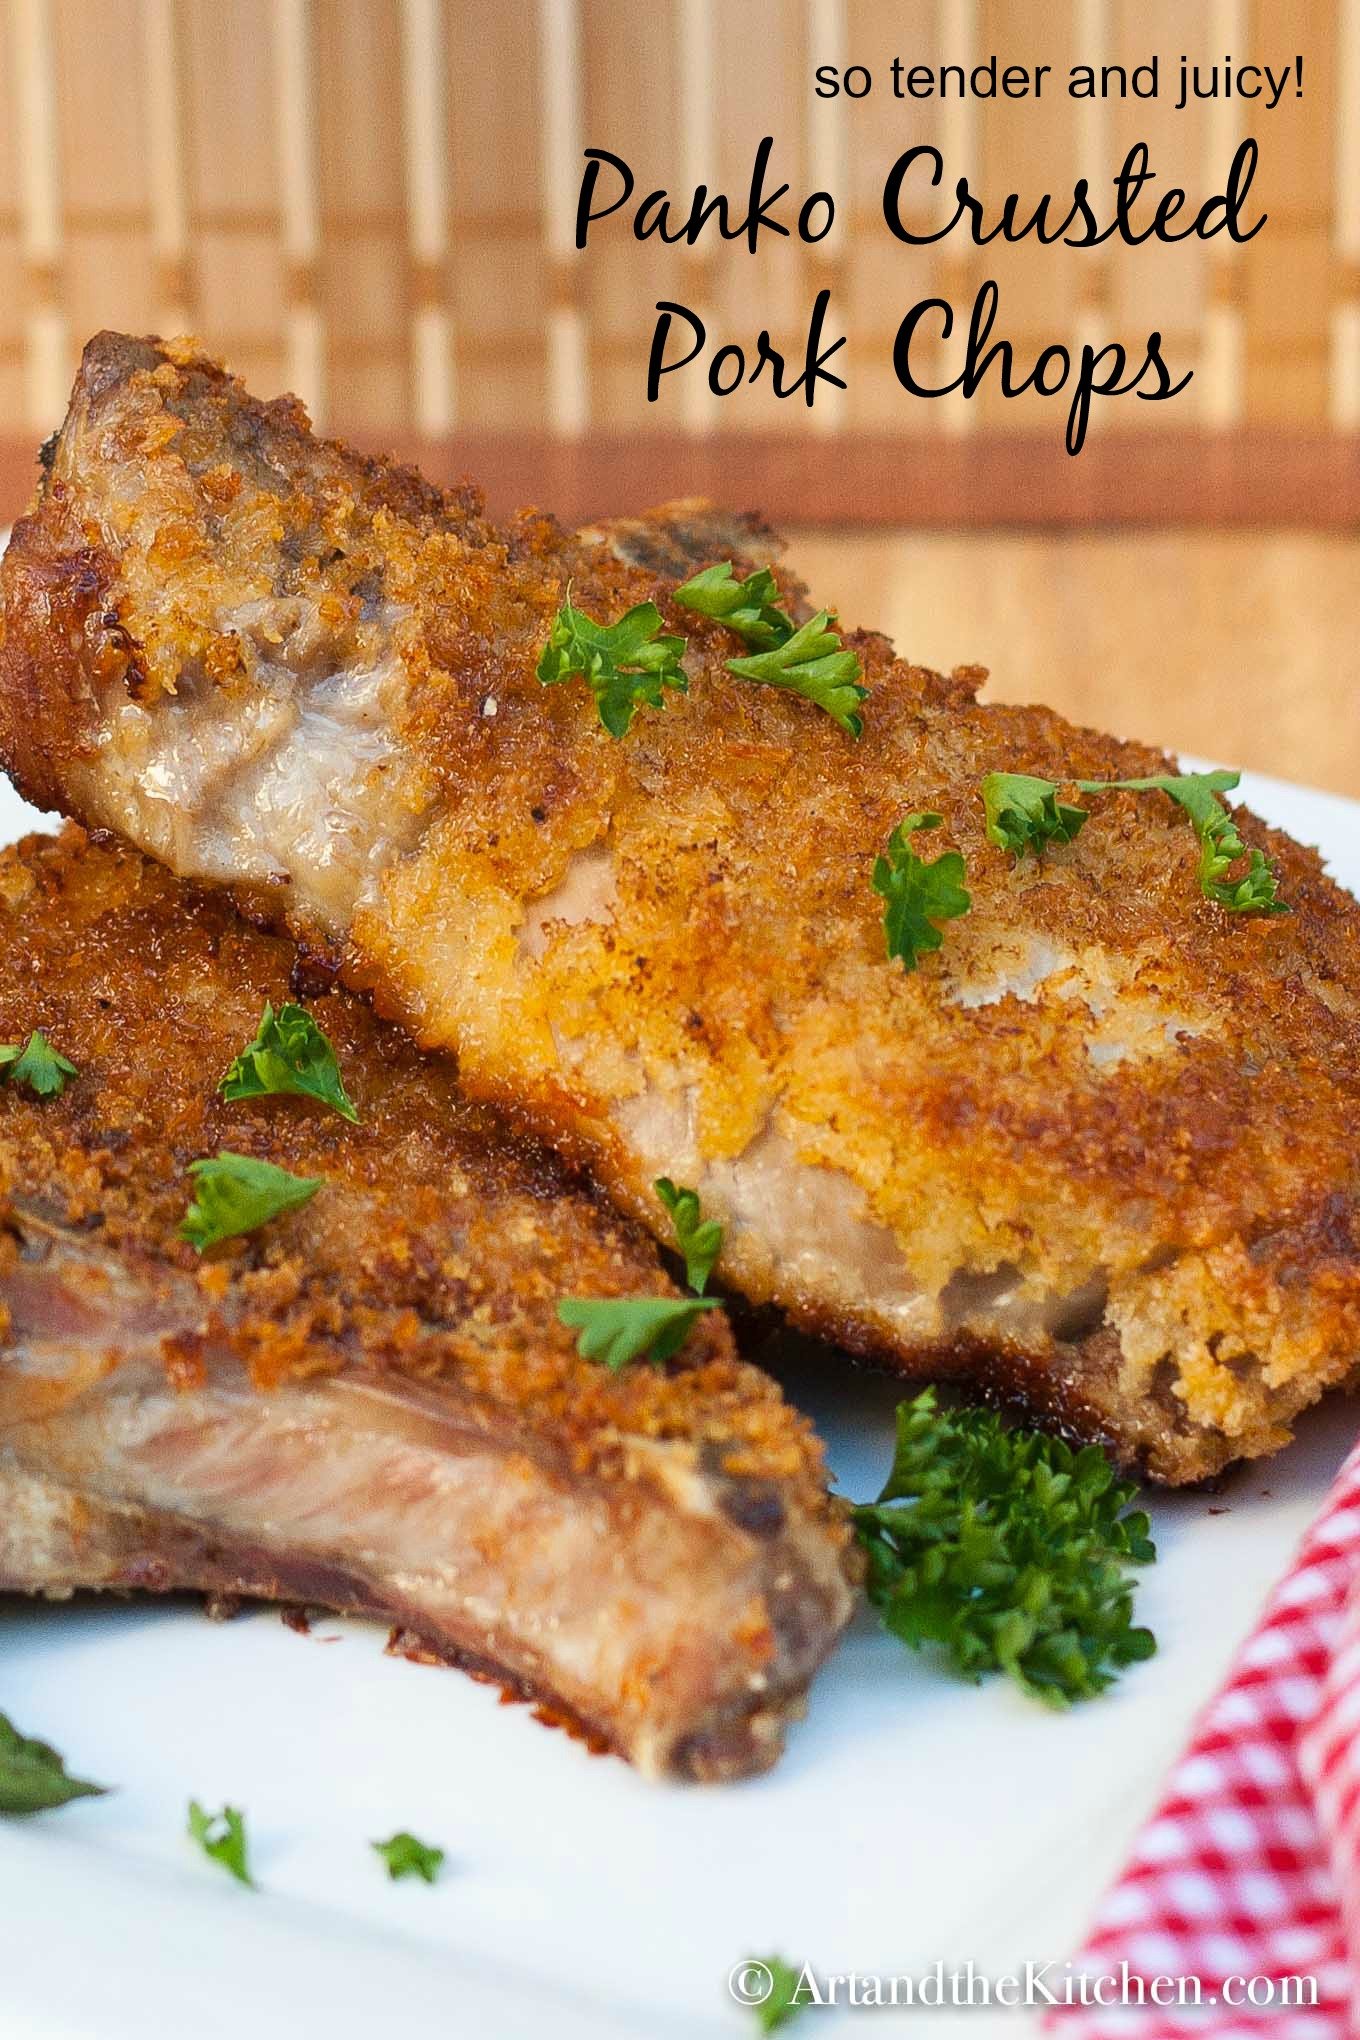 Panko Crusted Pork Chops Art and the Kitchen